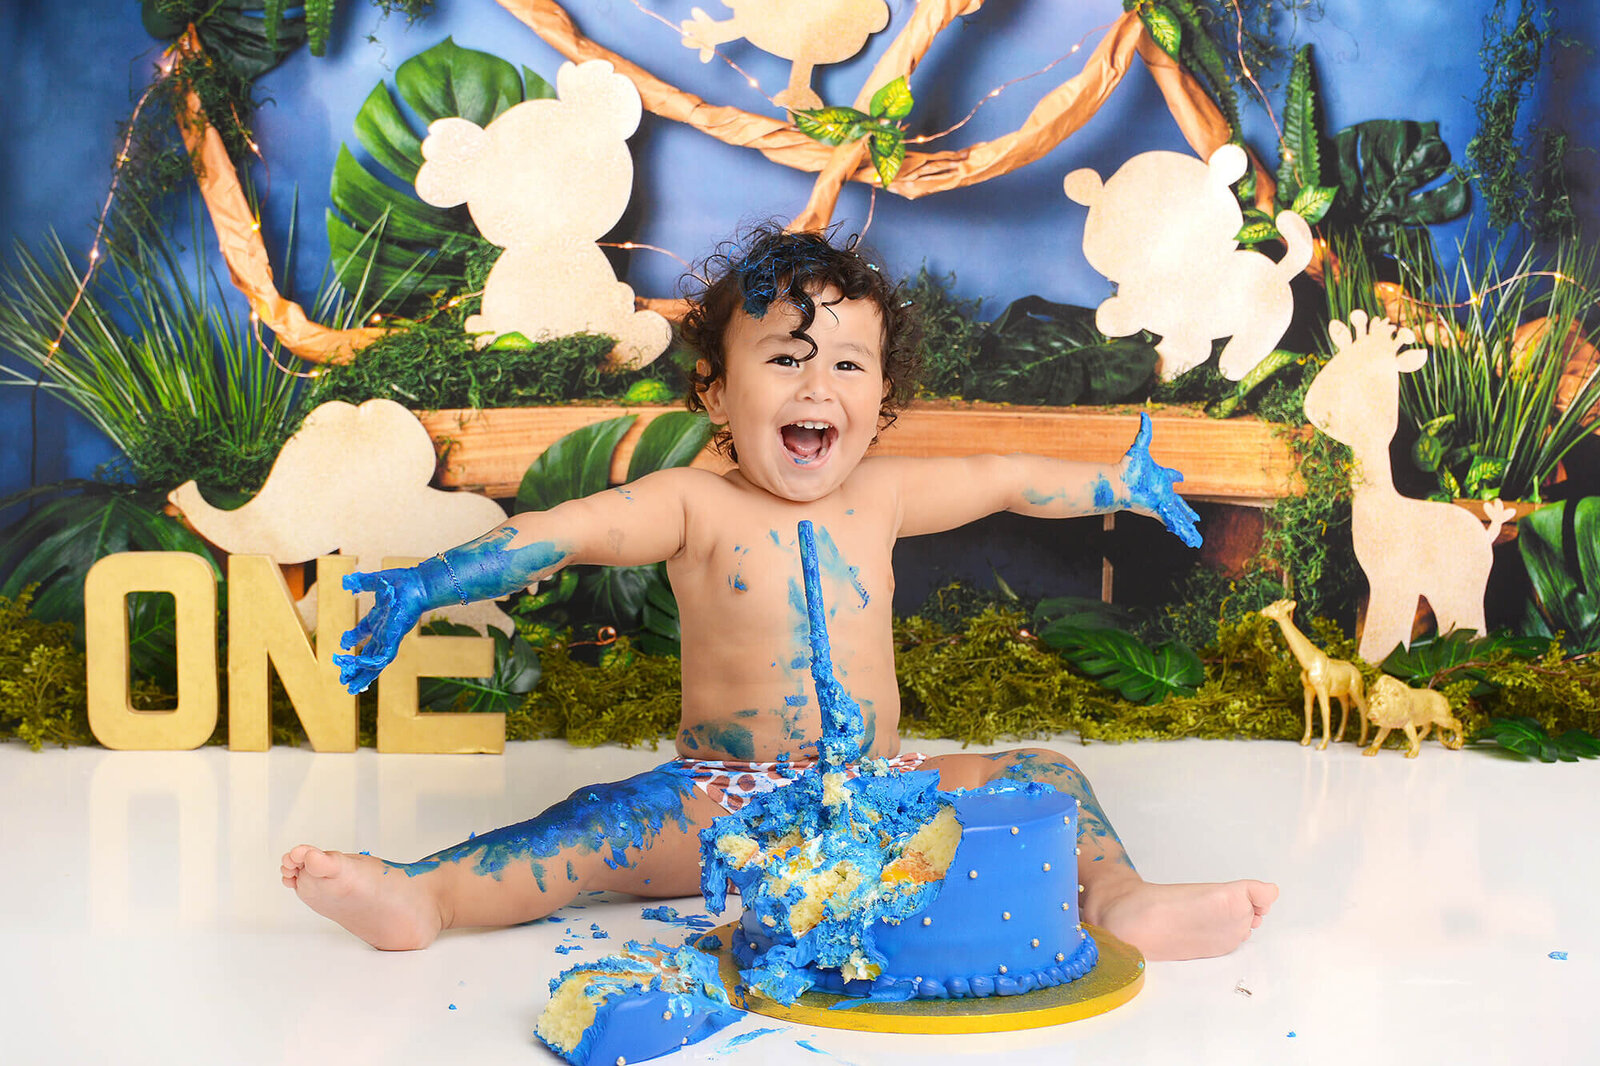 birthday boy covered in blue frosting from his birthday cake smiling in front of a jungle background